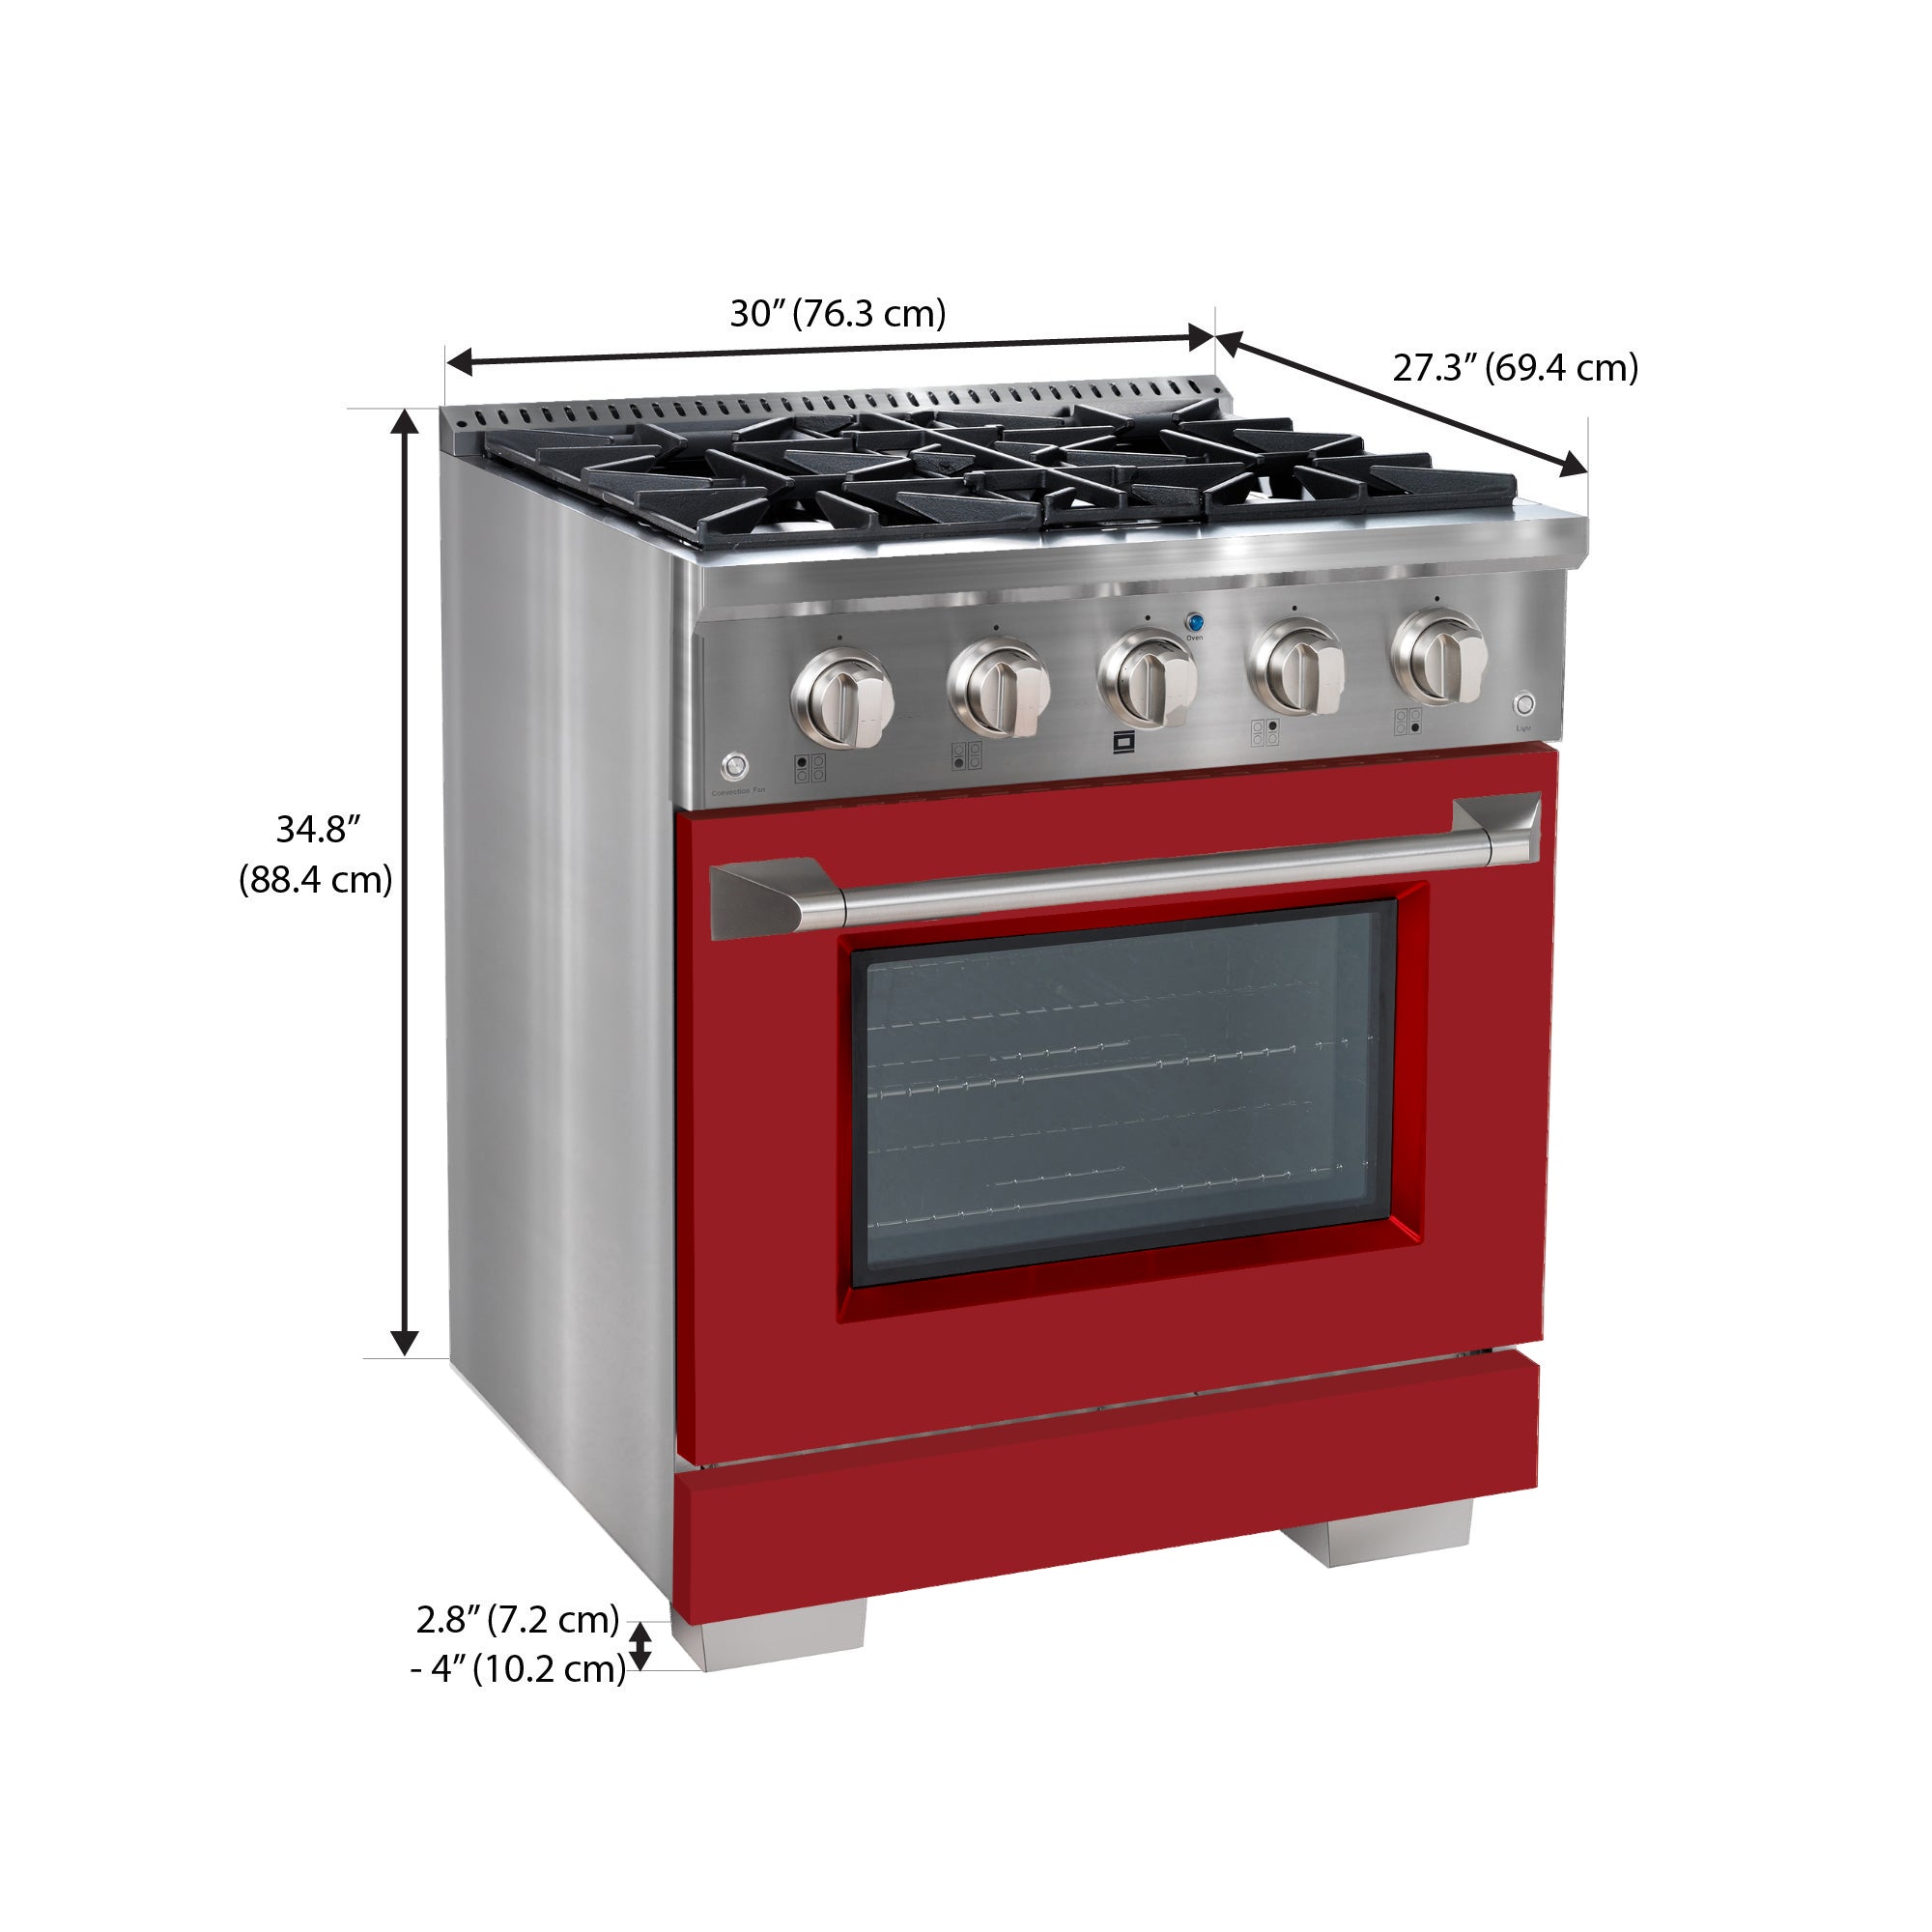 Ancona 2-piece Kitchen Appliance Package with 30